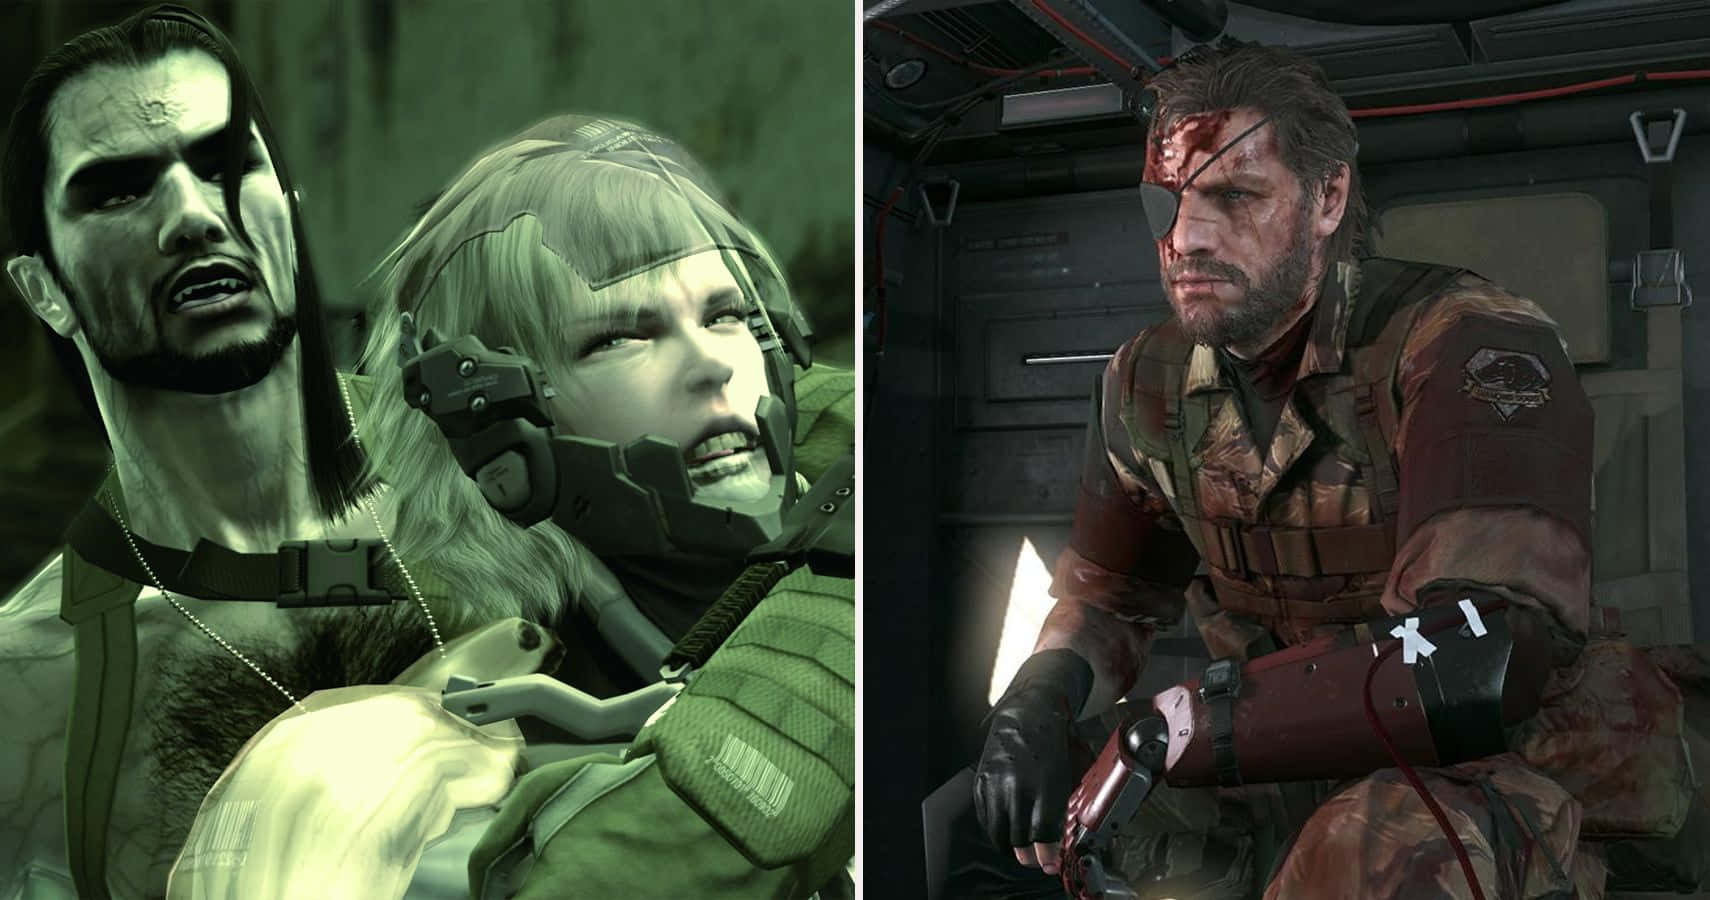 mgs3 ocelot is an absolute cringefest and im living for it | ac: noriu... |  TikTok